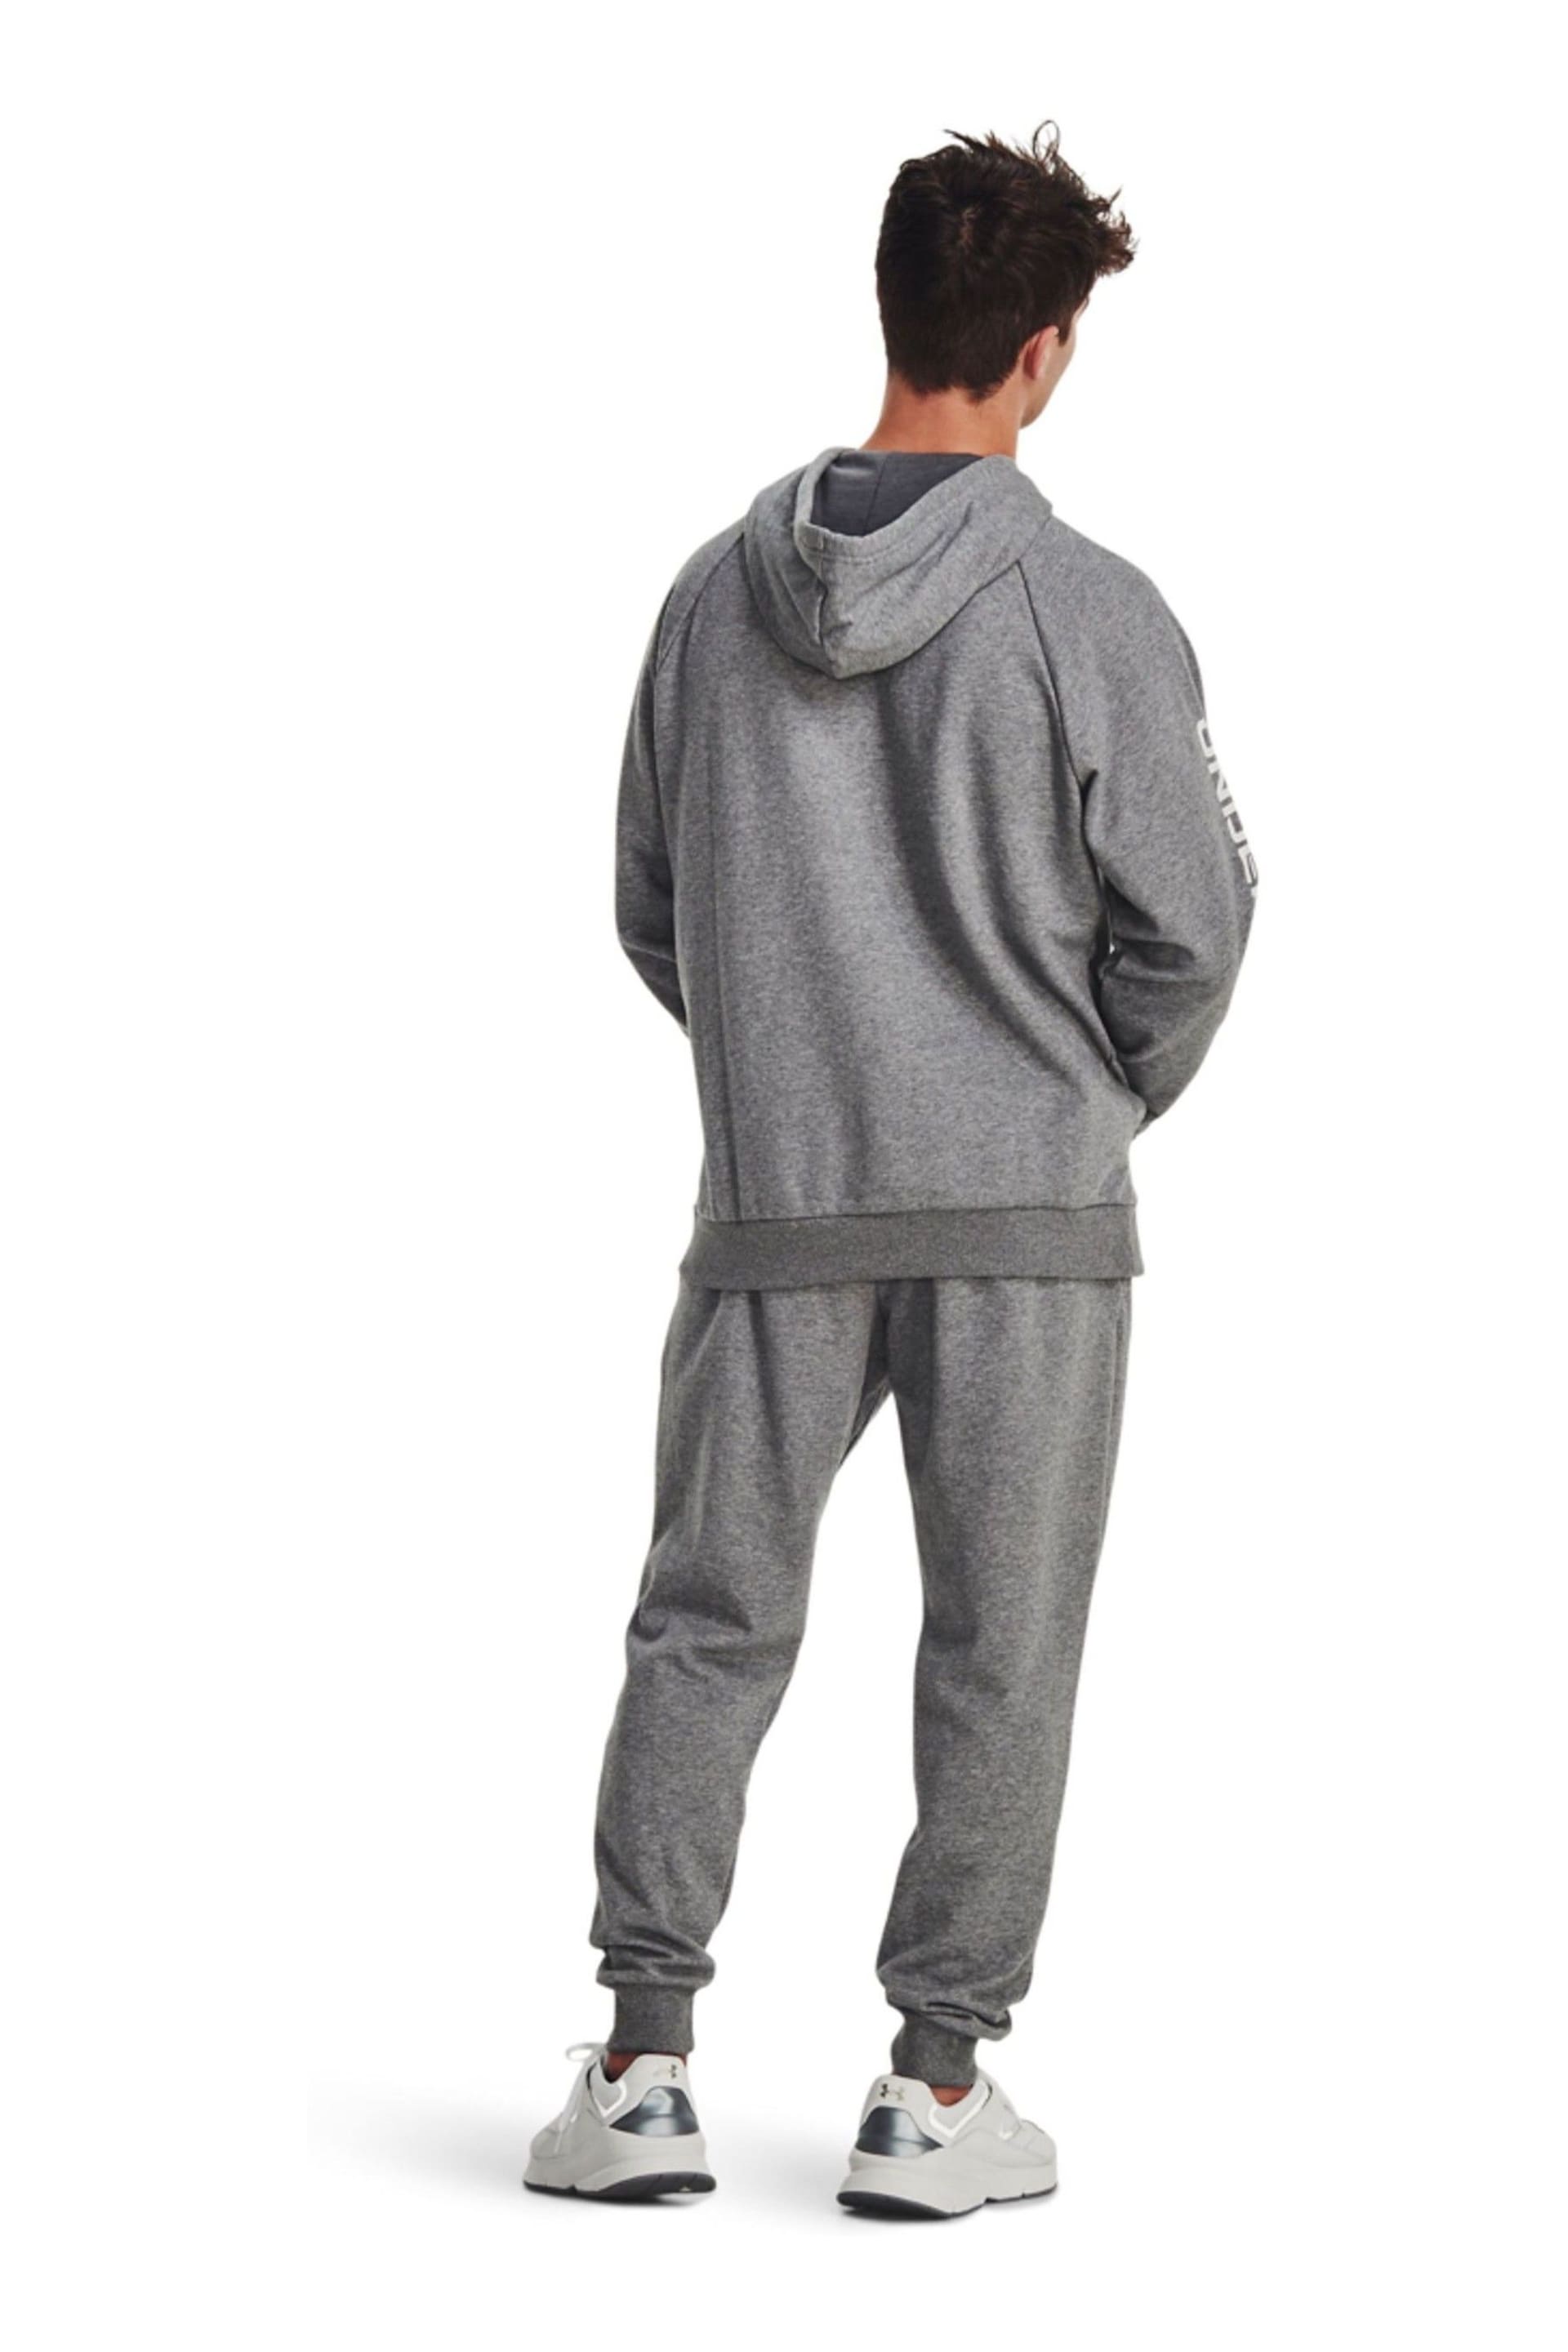 Under Armour Grey/White Under Armour Rival Fleece Tracksuit - Image 2 of 6